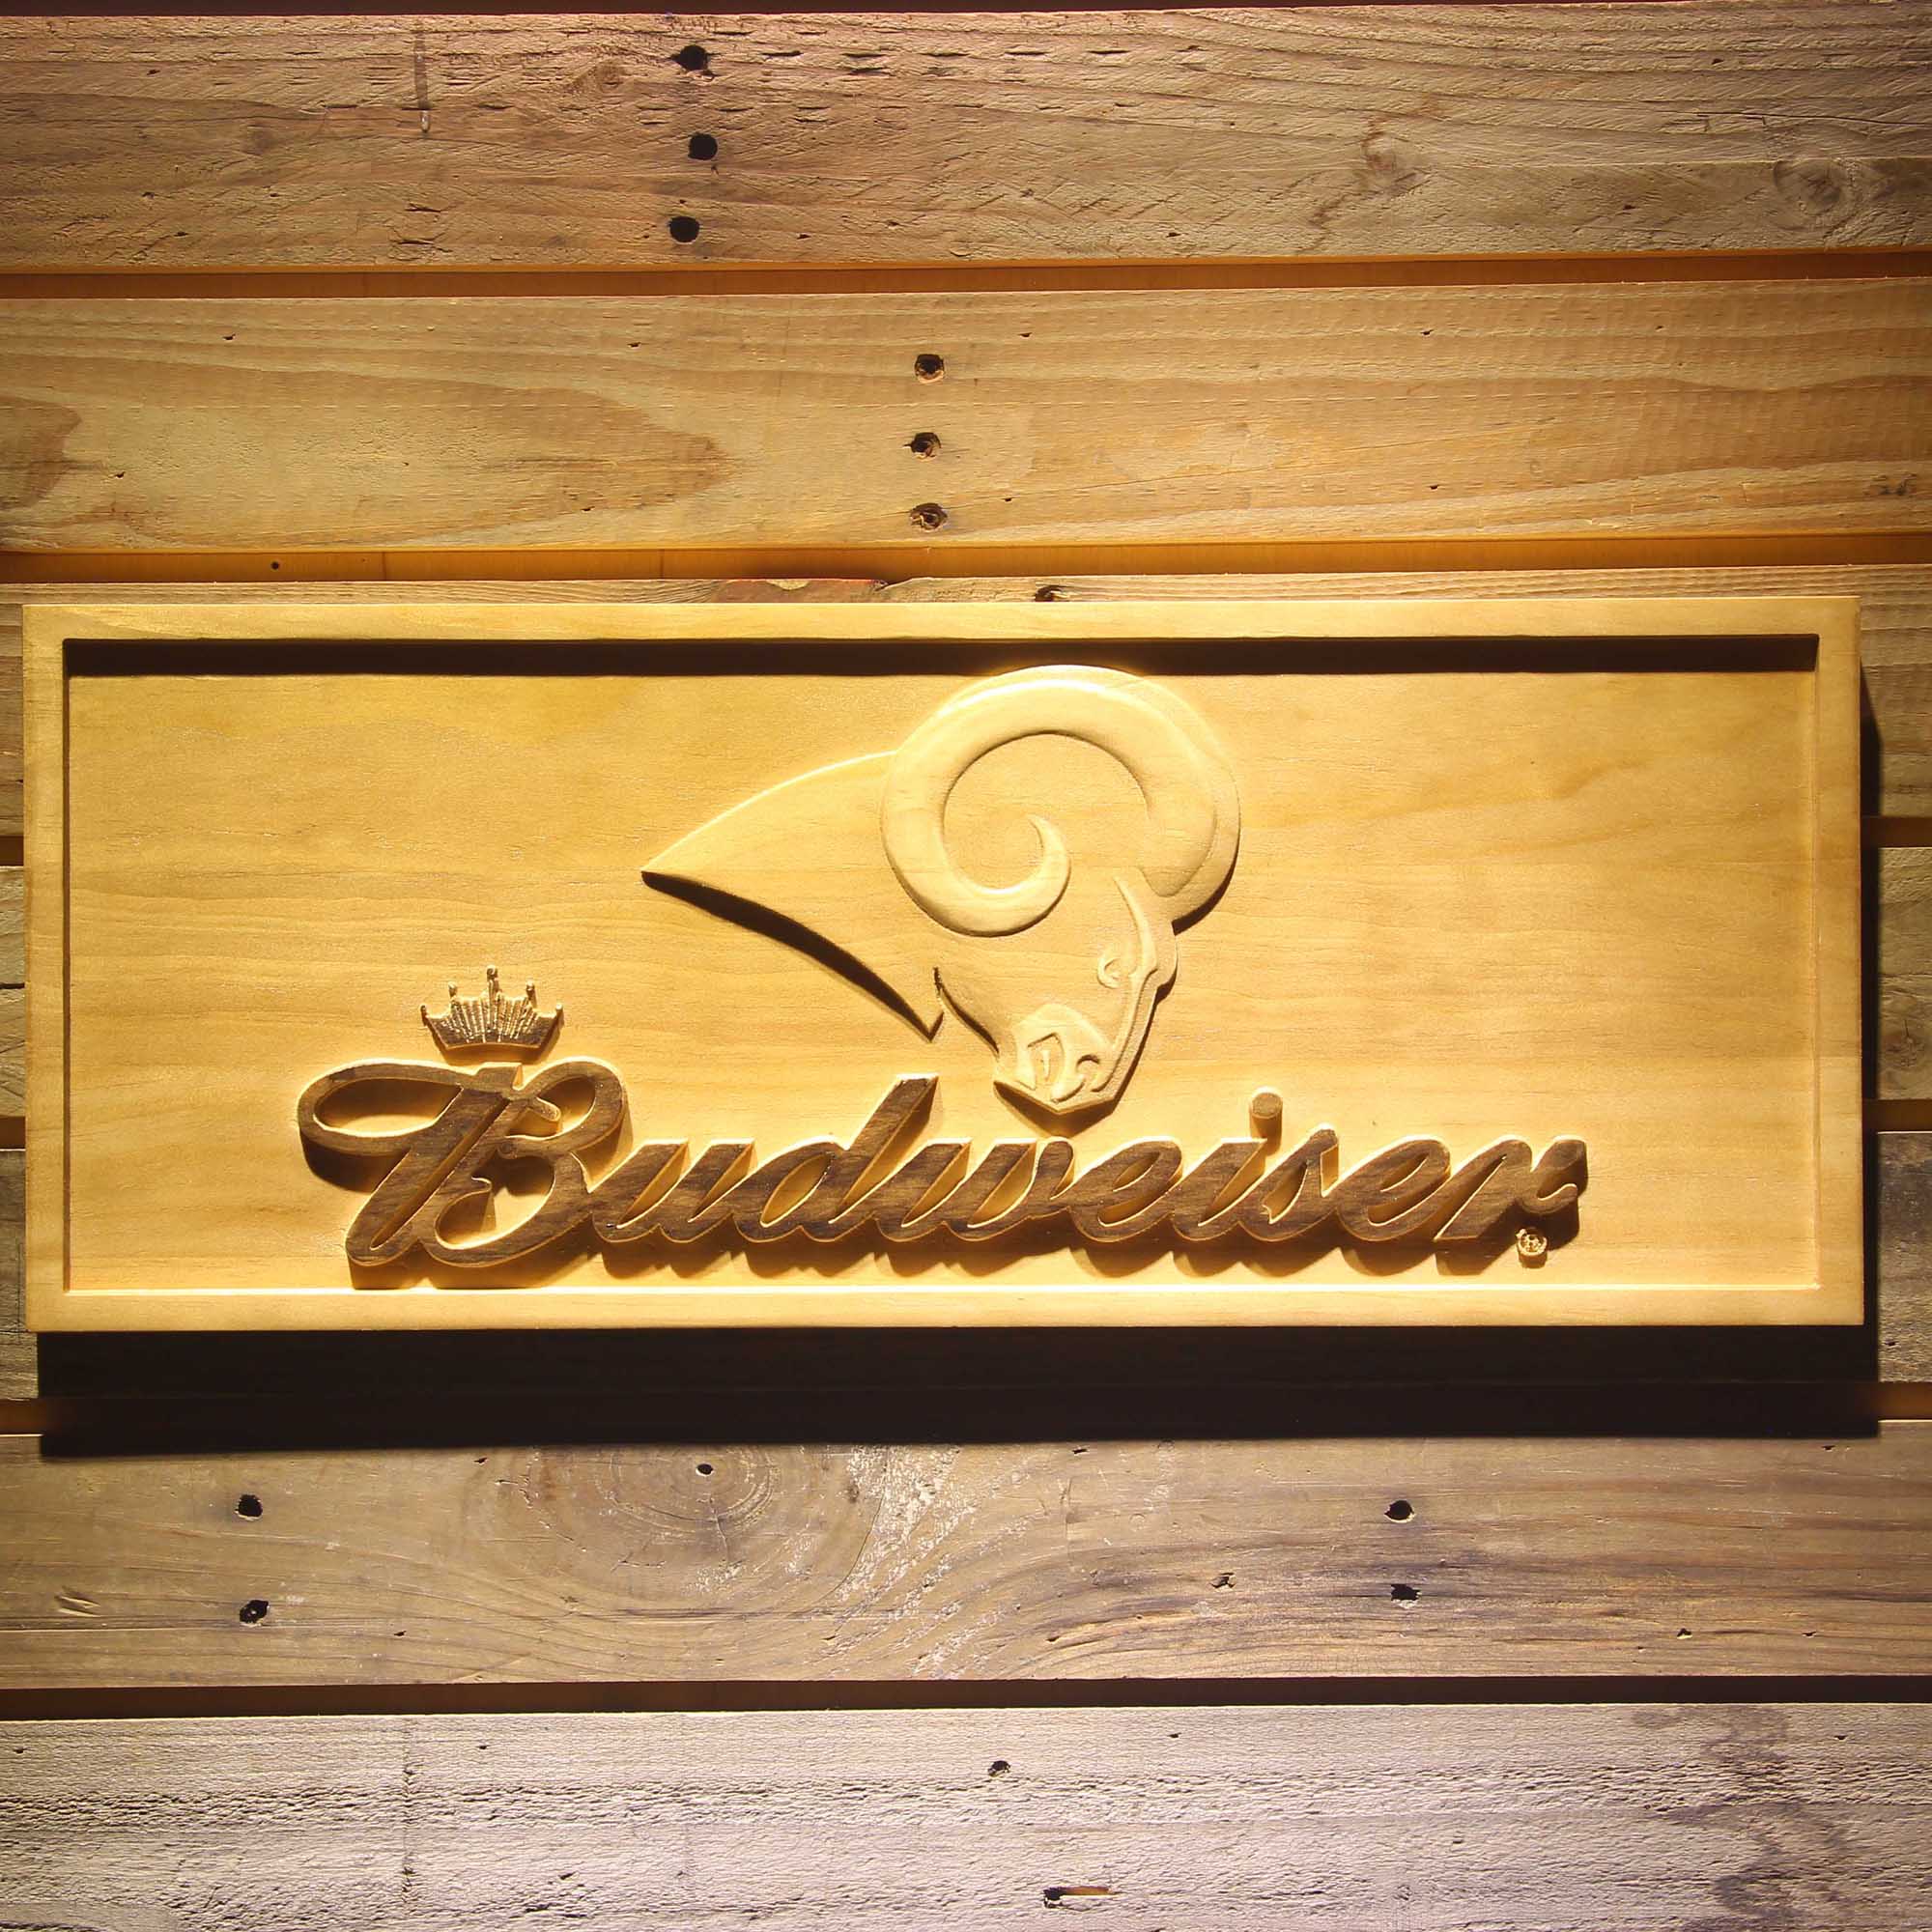 Los Angeles Rams Budweiser 3D Solid Wooden Craving Sign